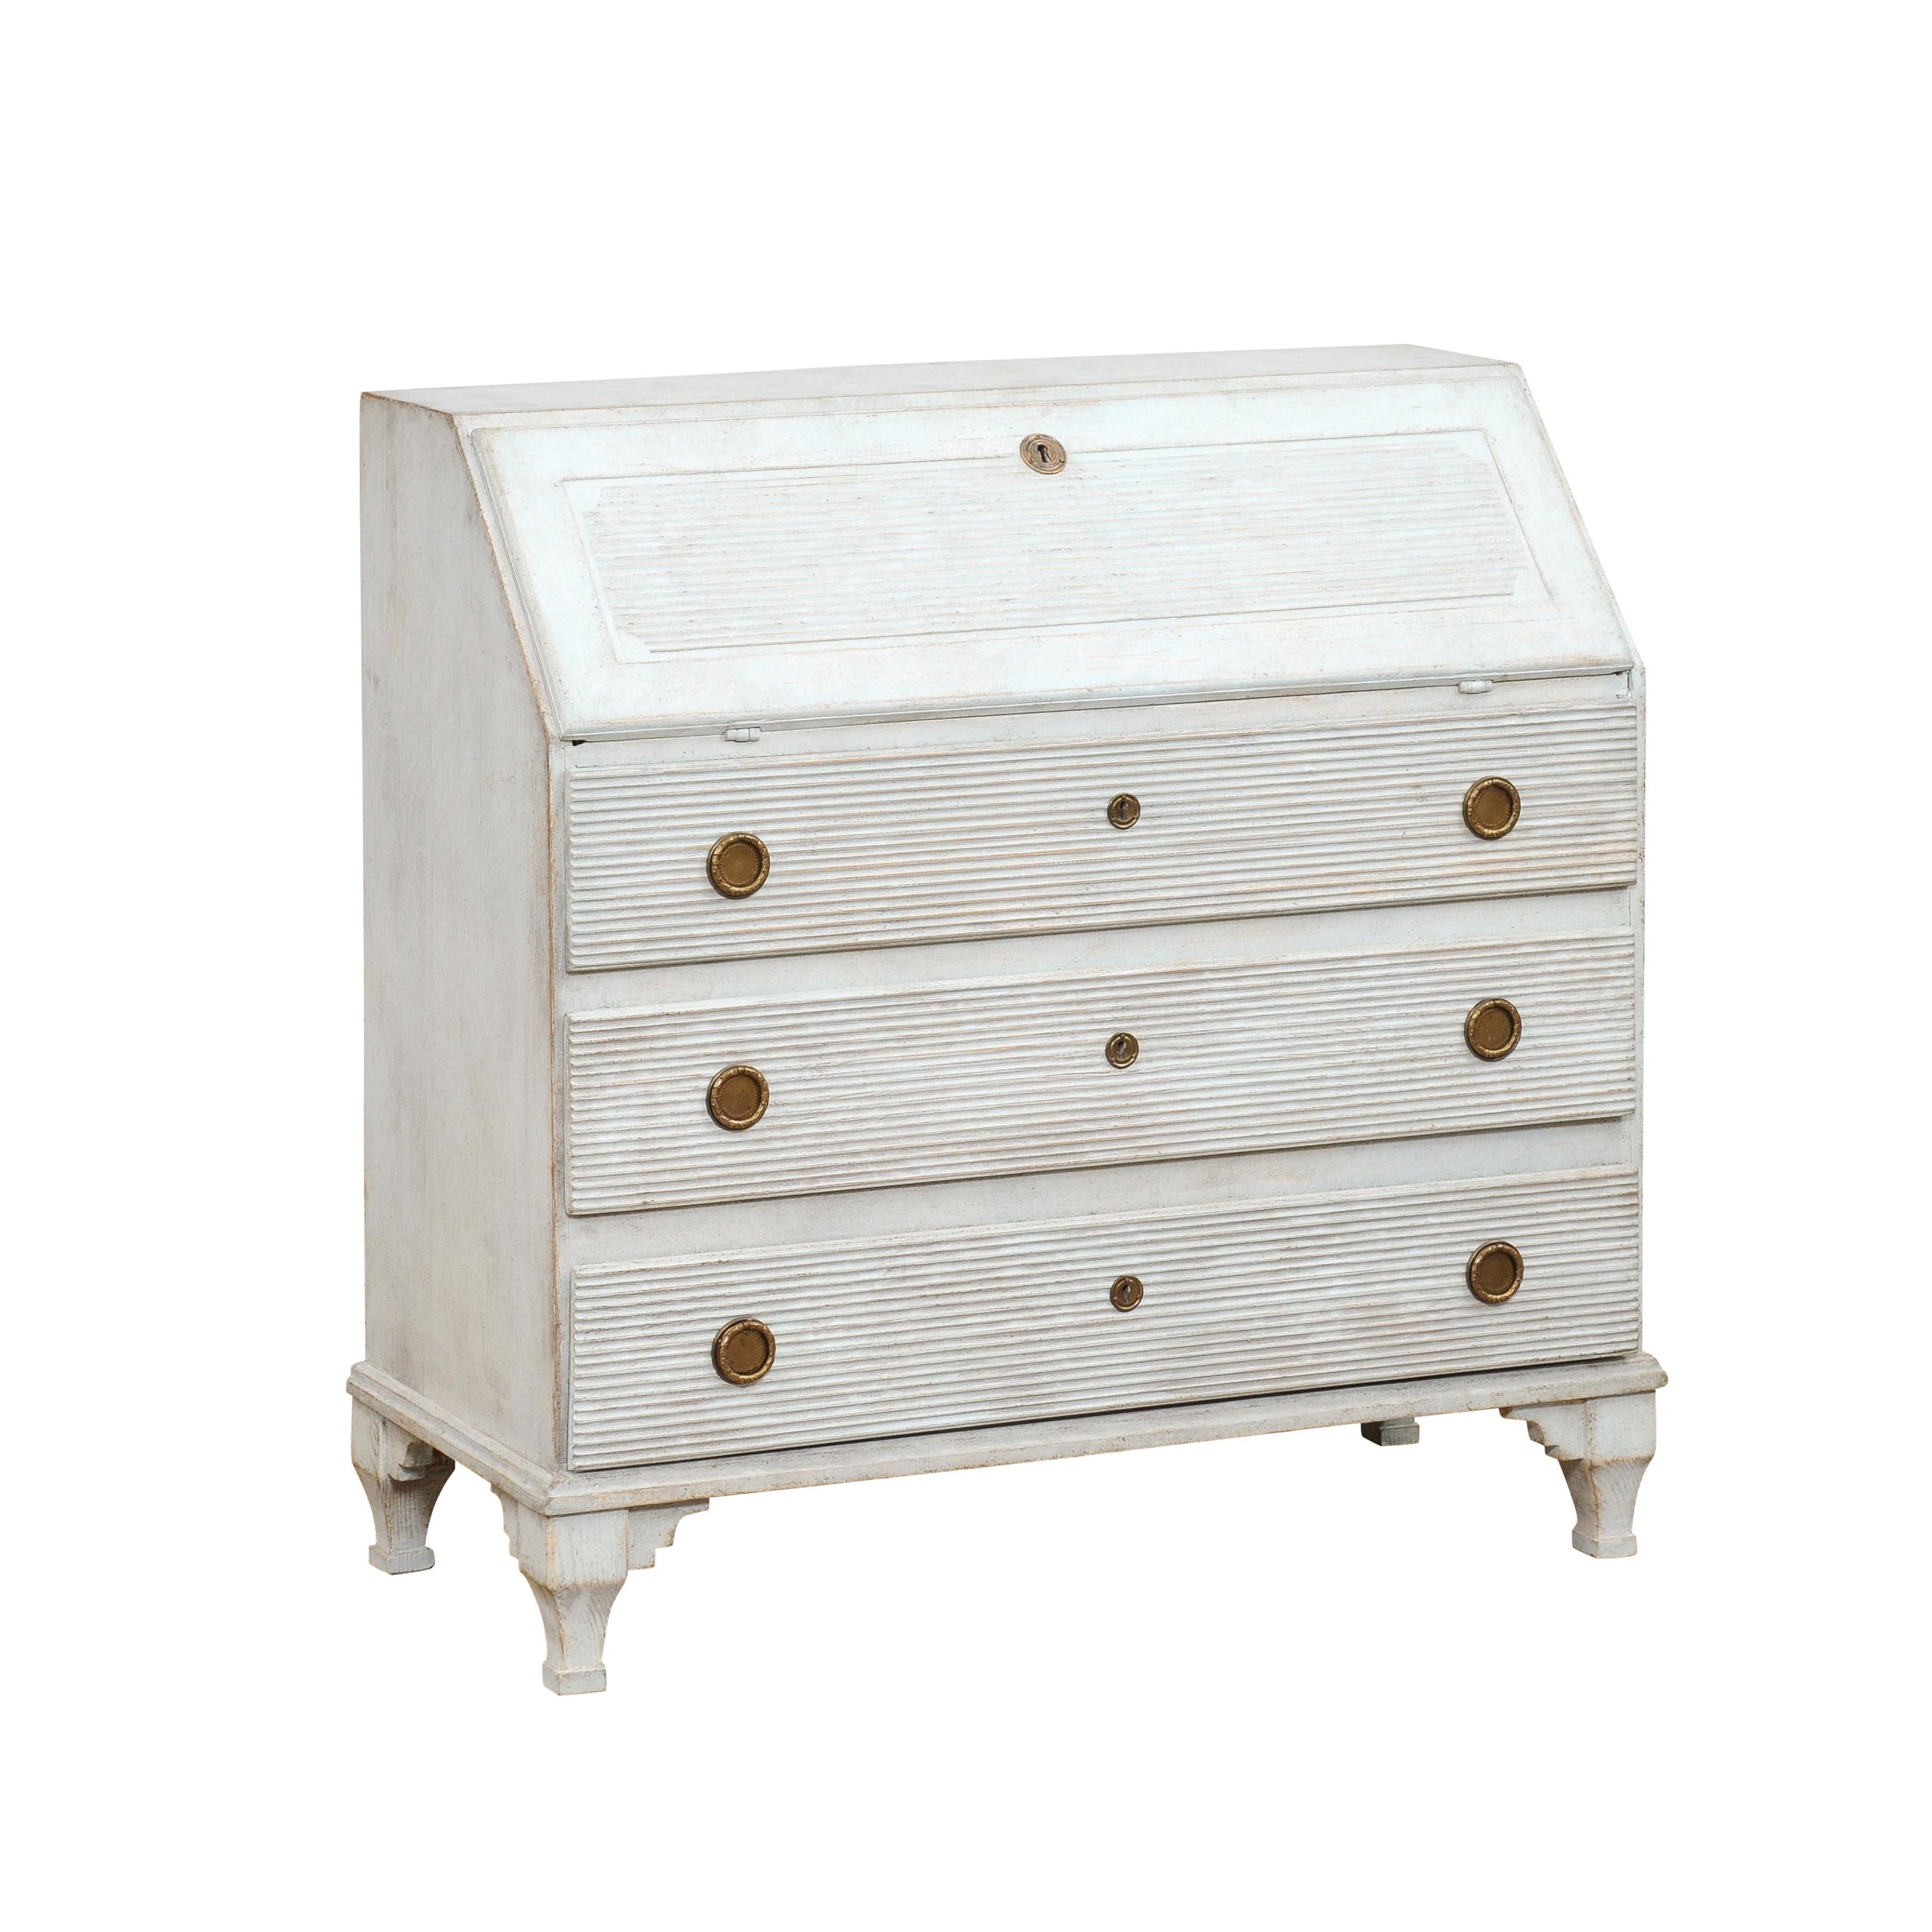 A Swedish Gustavian style painted wood secretary circa 1820 with slant front desk, carved fluted motifs, three drawers and carved feet. Transport yourself to the elegant Swedish Gustavian style with this charming painted wood secretary from the